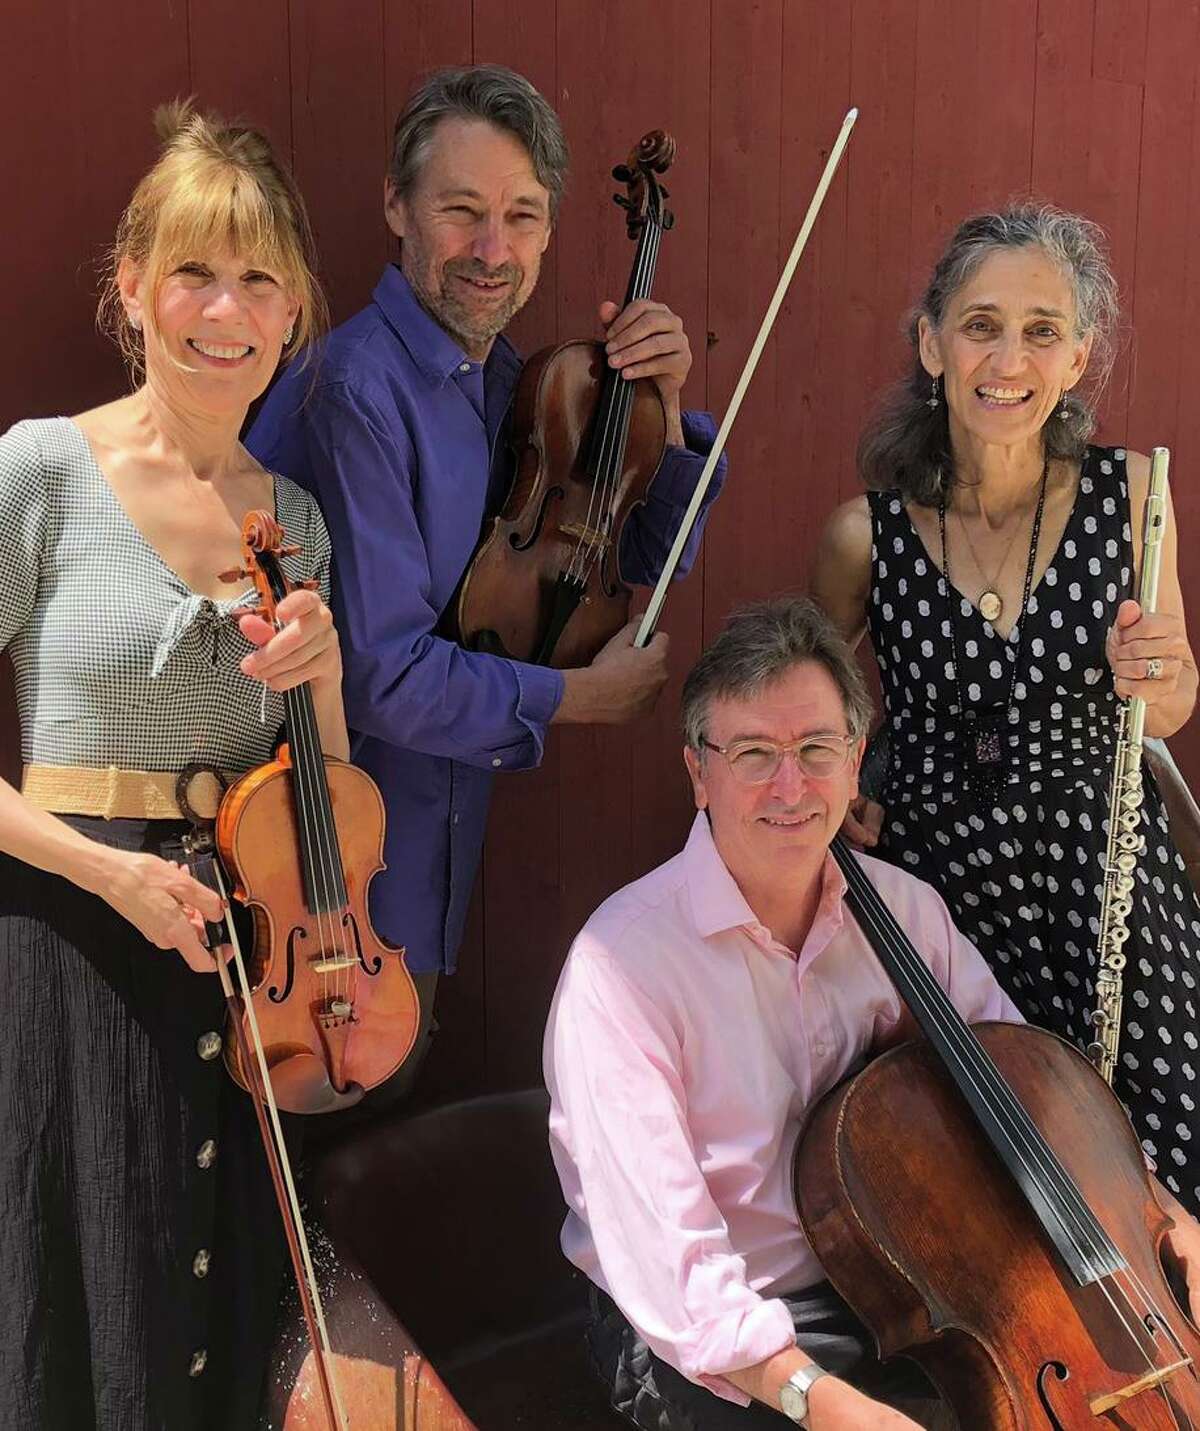 The Sherman Chamber Ensemble presents "Women of Genius" with performances Aug. 12-13.